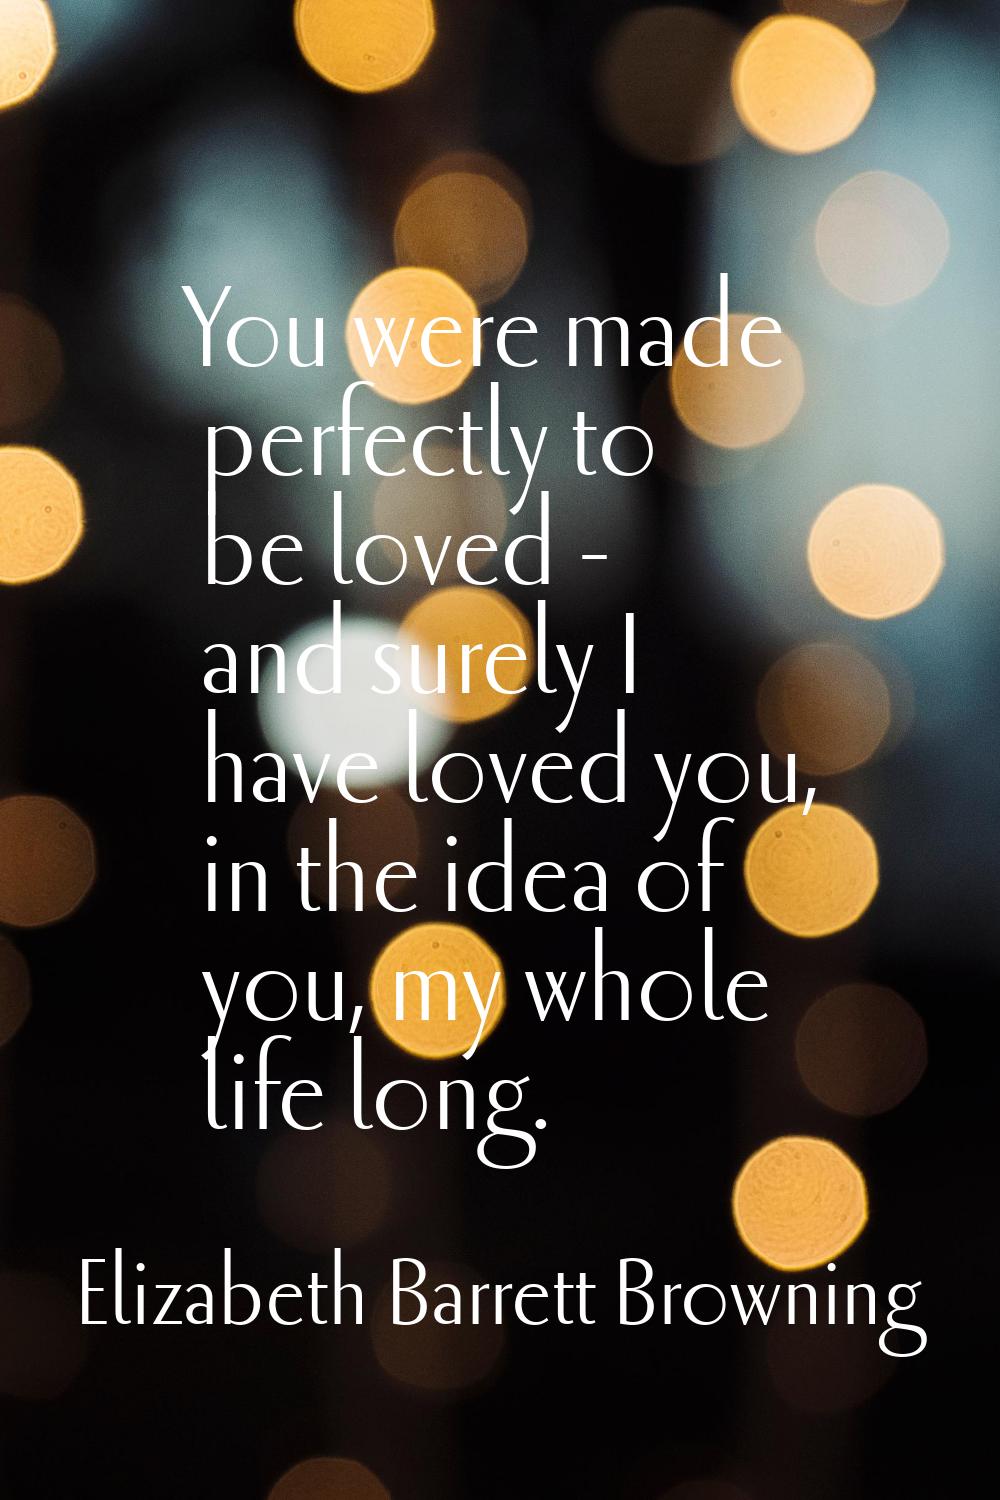 You were made perfectly to be loved - and surely I have loved you, in the idea of you, my whole lif